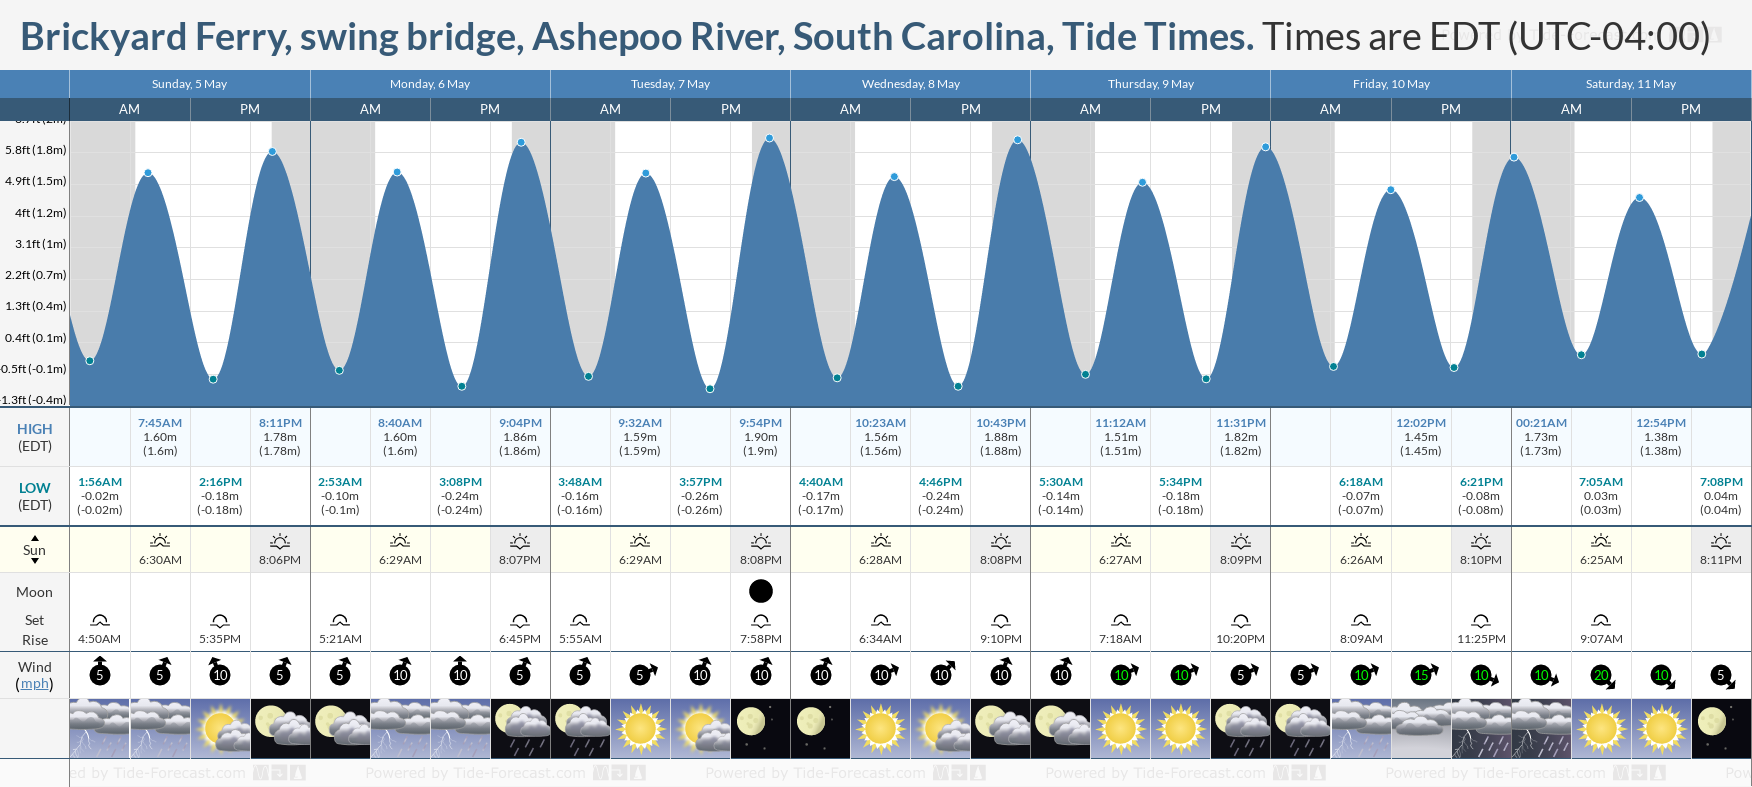 Brickyard Ferry, swing bridge, Ashepoo River, South Carolina Tide Chart including high and low tide tide times for the next 7 days